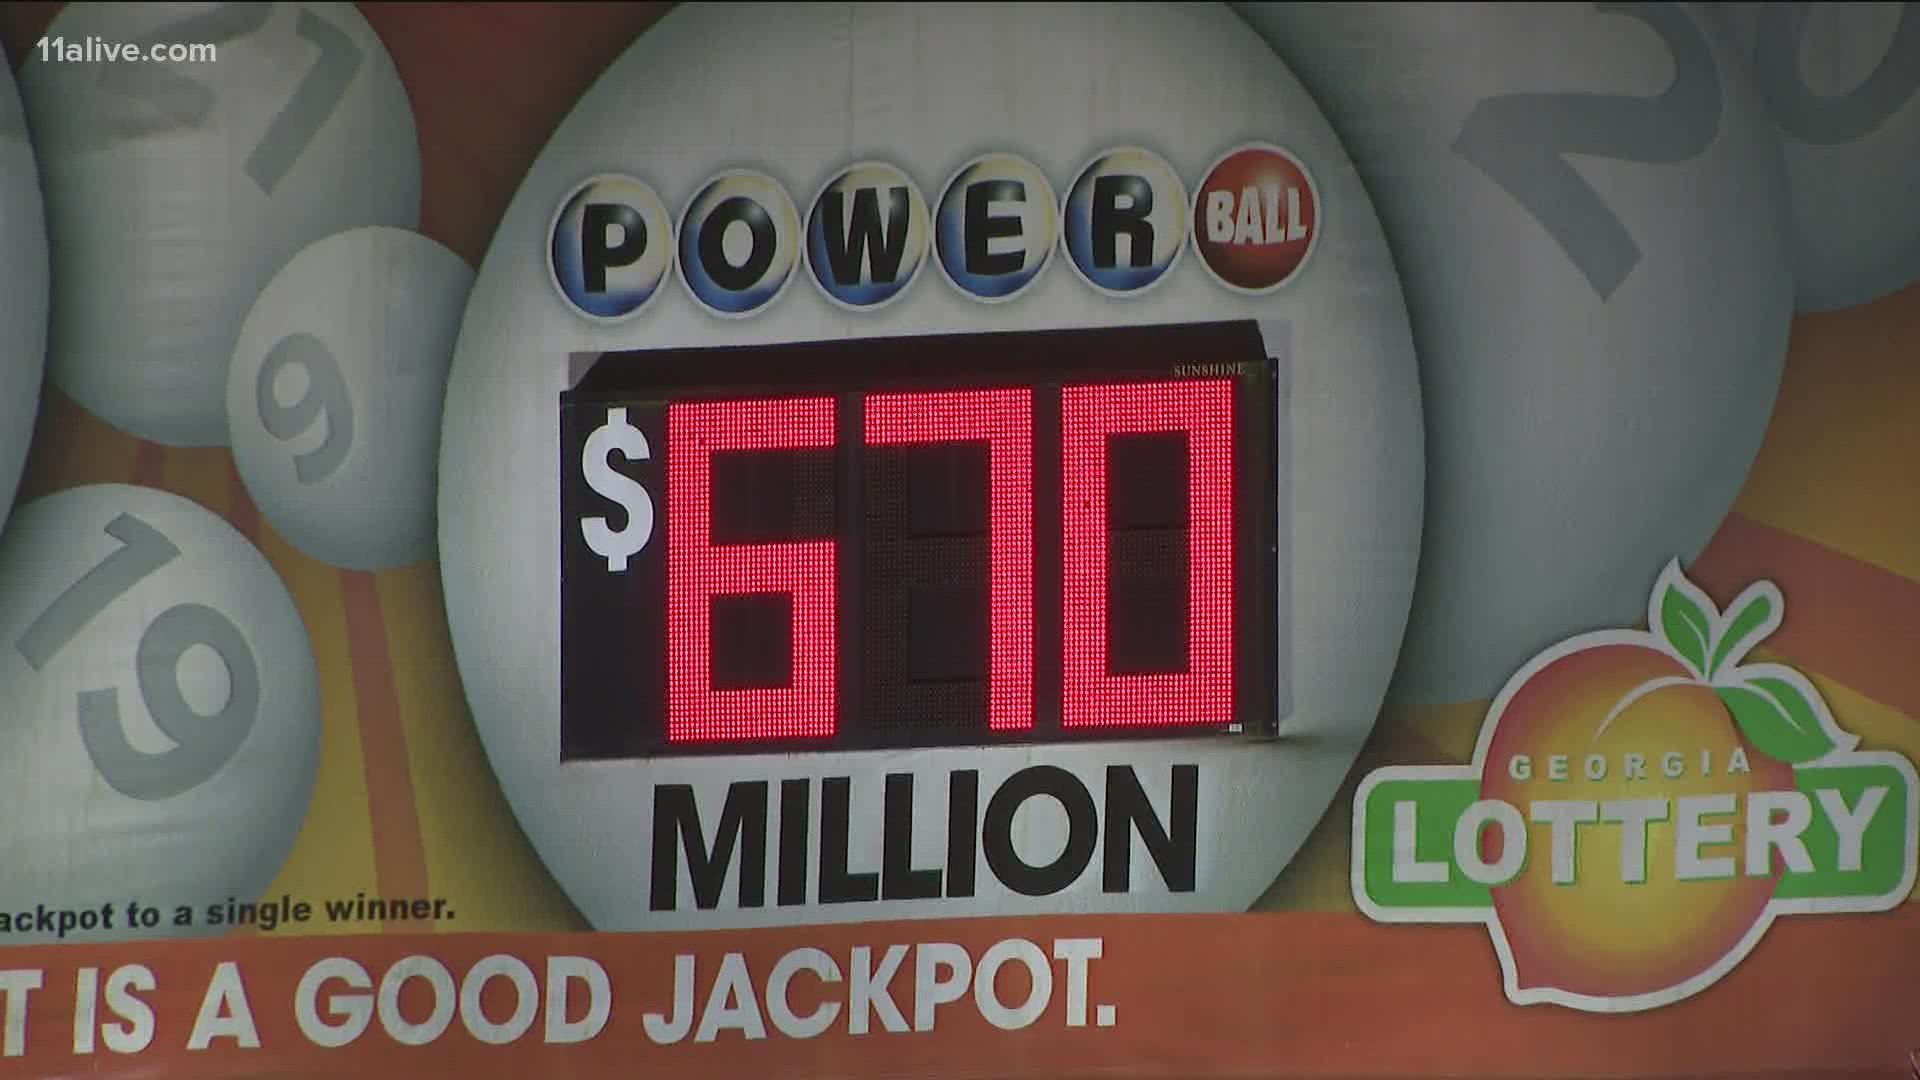 It's the fifth-largest jackpot in history with a prize of $670 million! Wow!